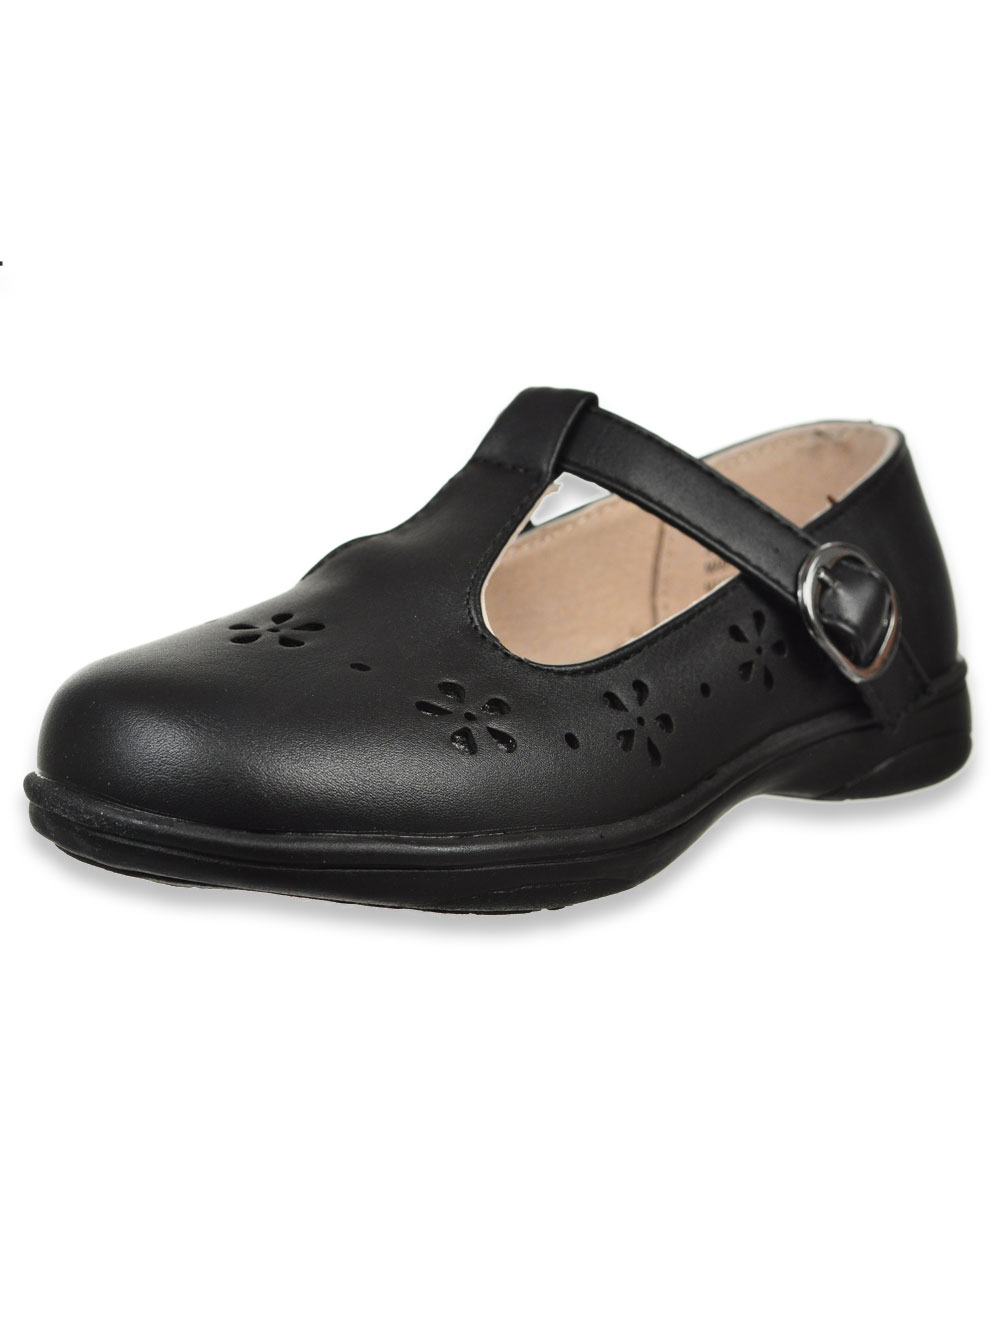 baby girl black mary jane shoes